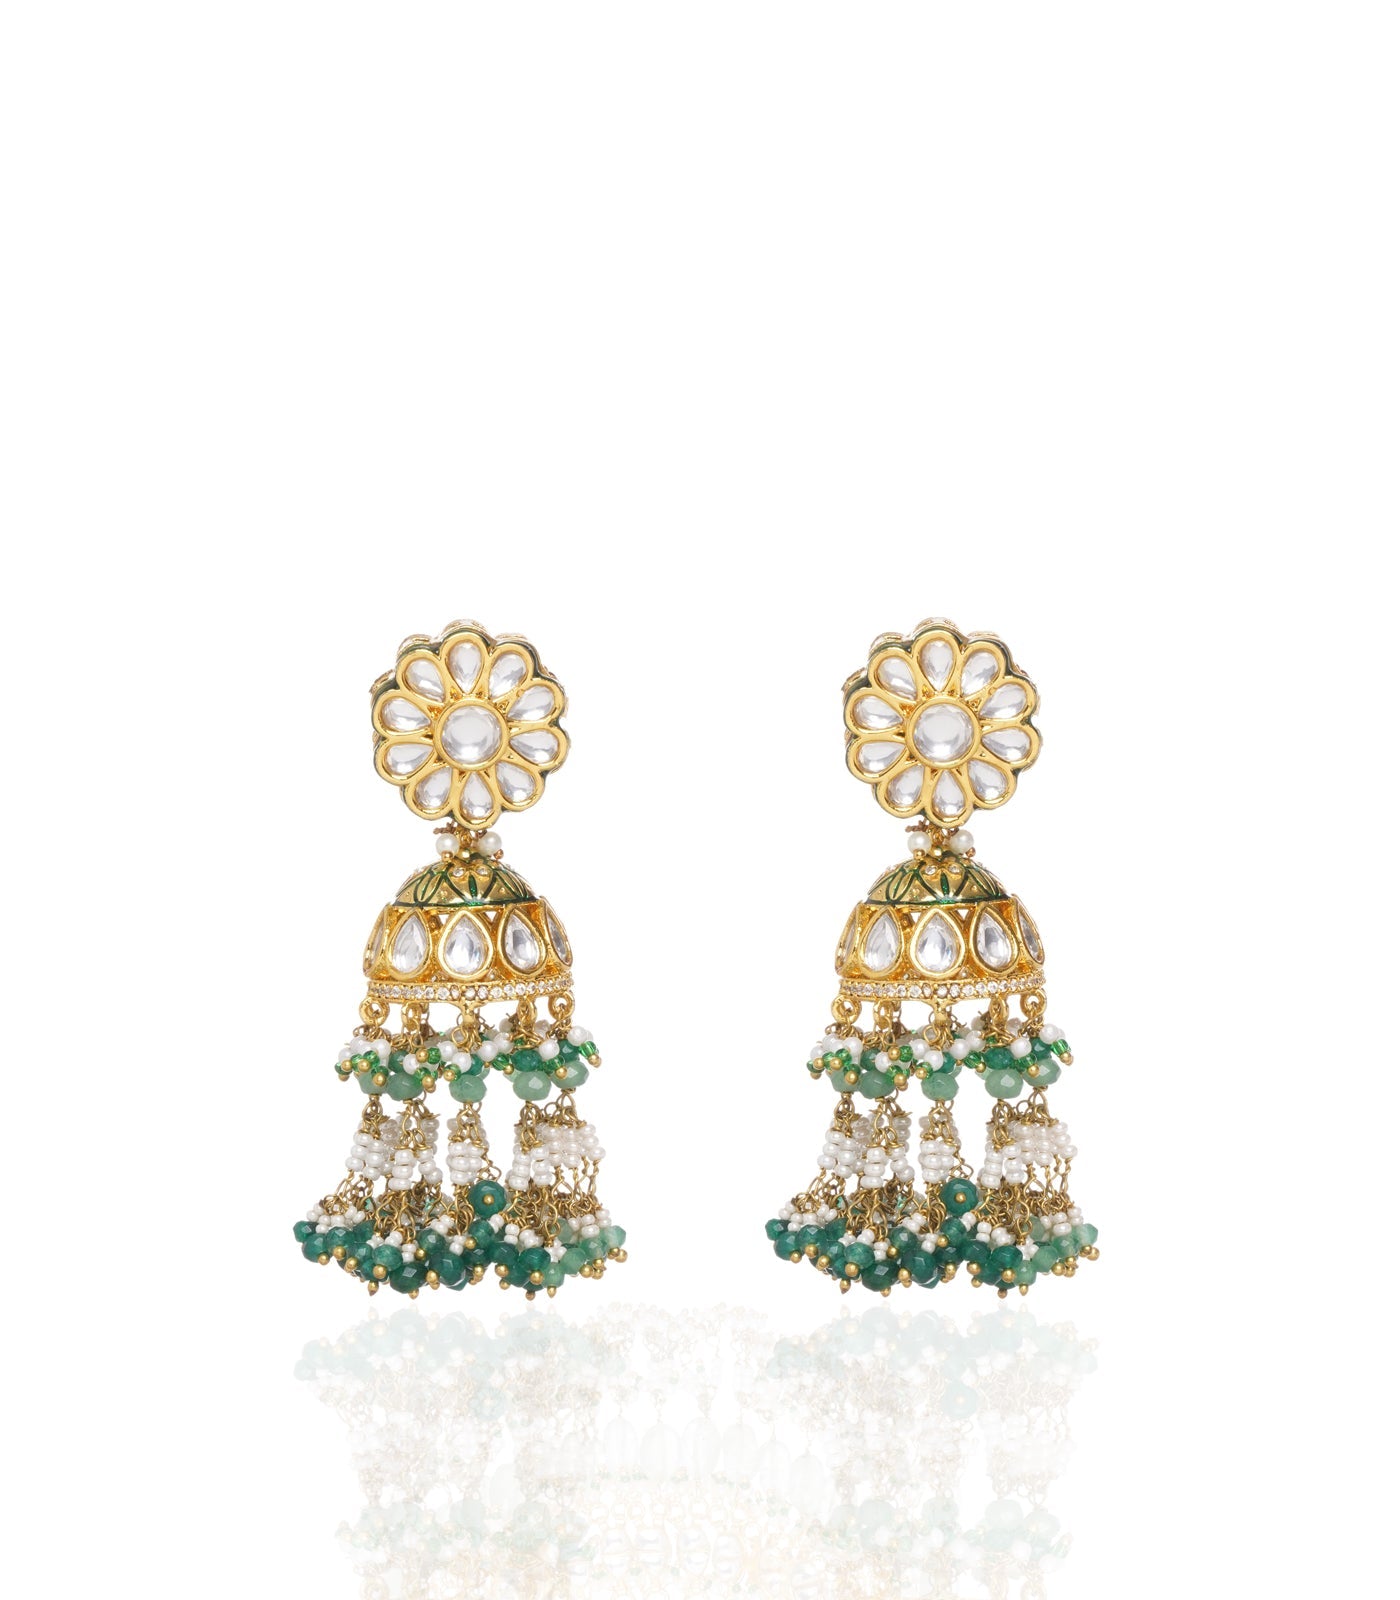 Preeti Mohan - Chandni Gold Plated Green Kundan Necklace Set With Green & White Drops